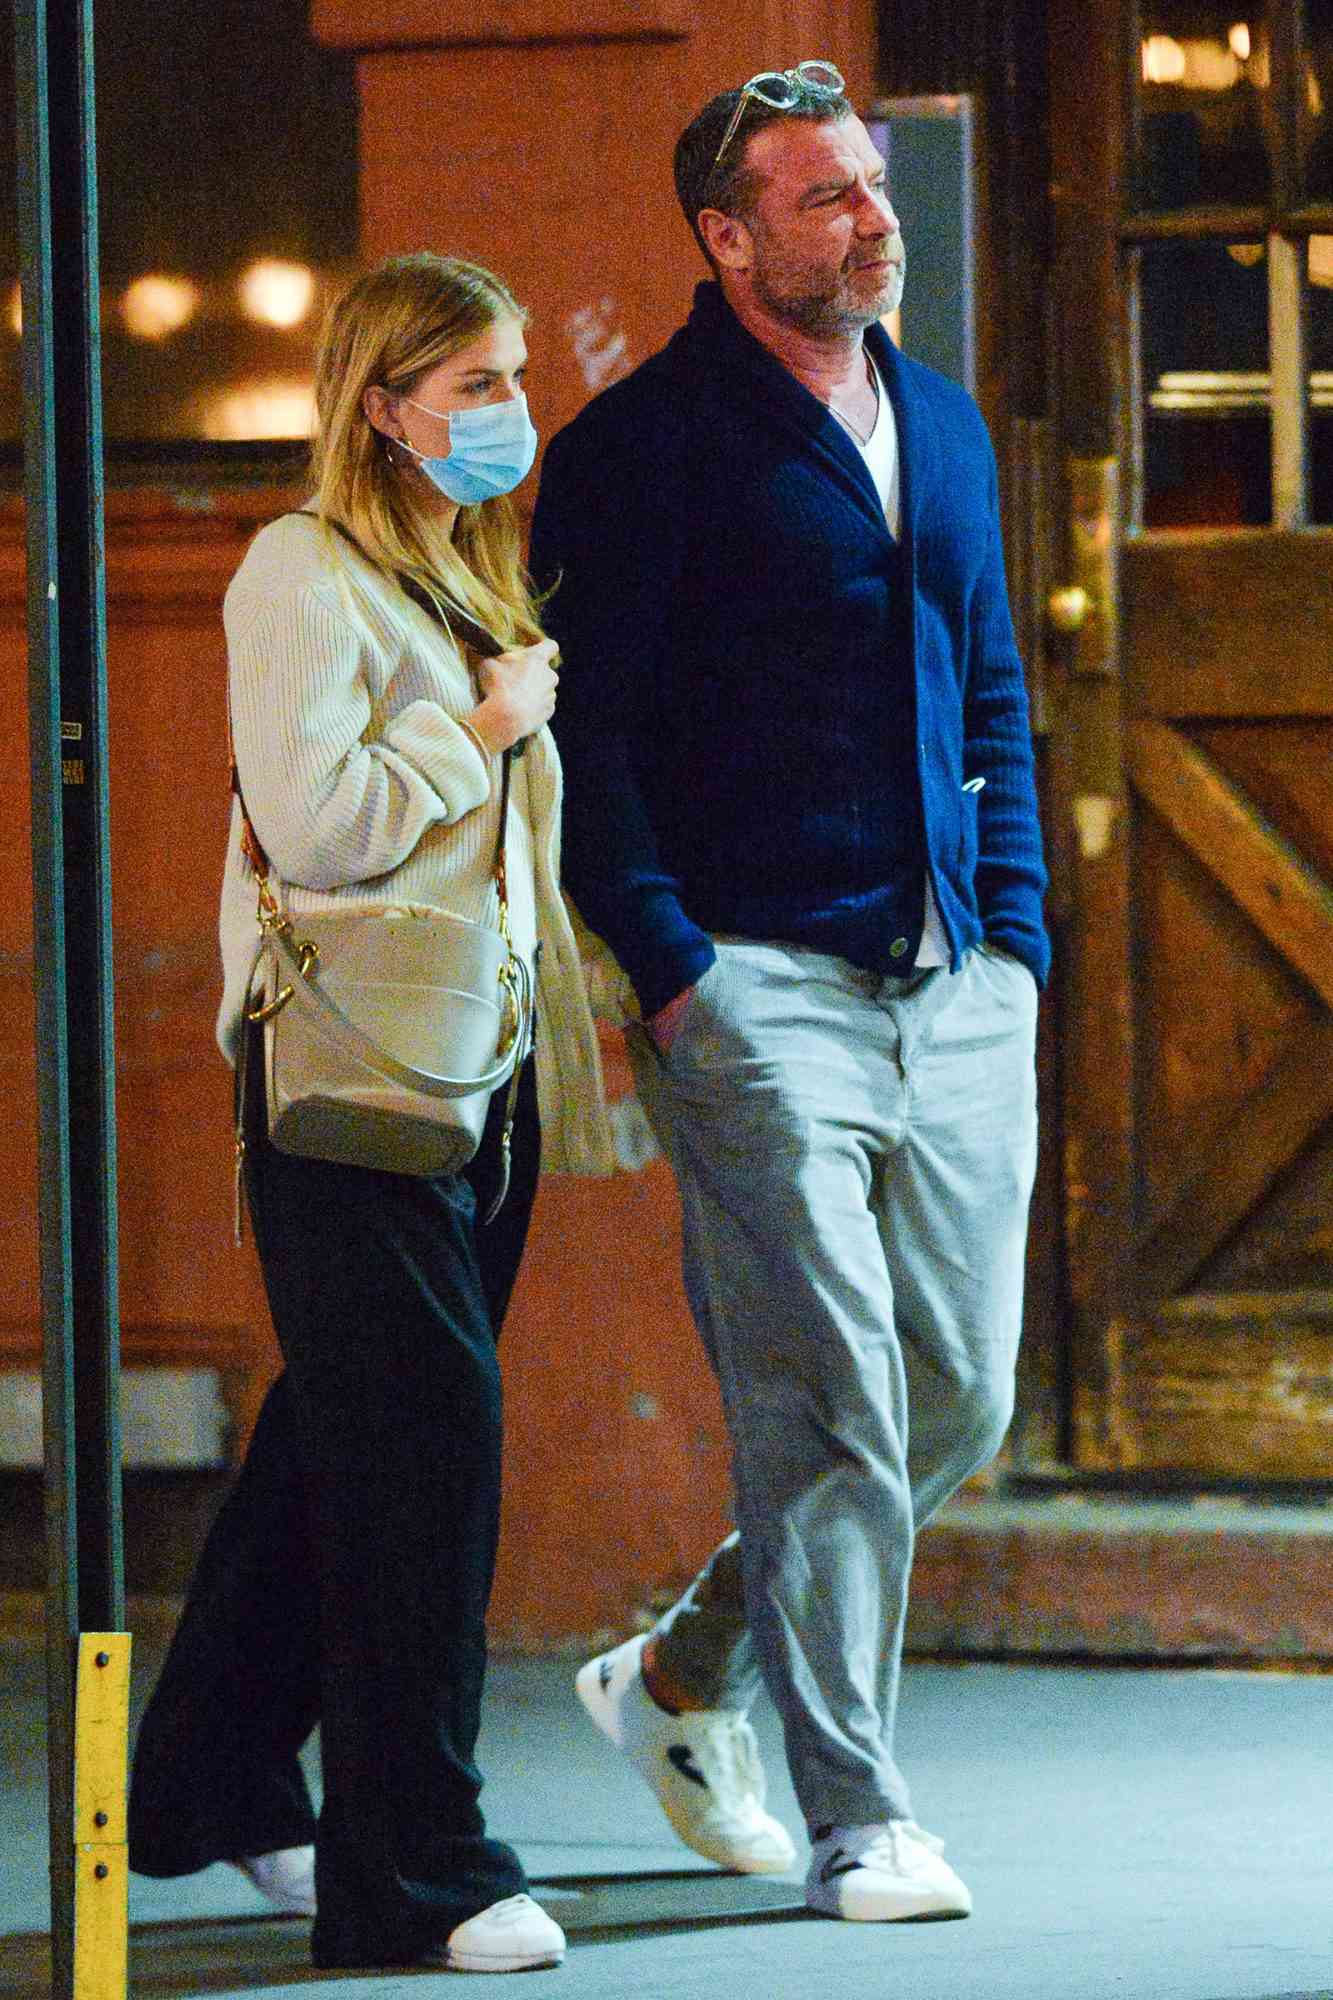 Liev Schreiber and Taylor Neisen are spotted out on a date night in New York City